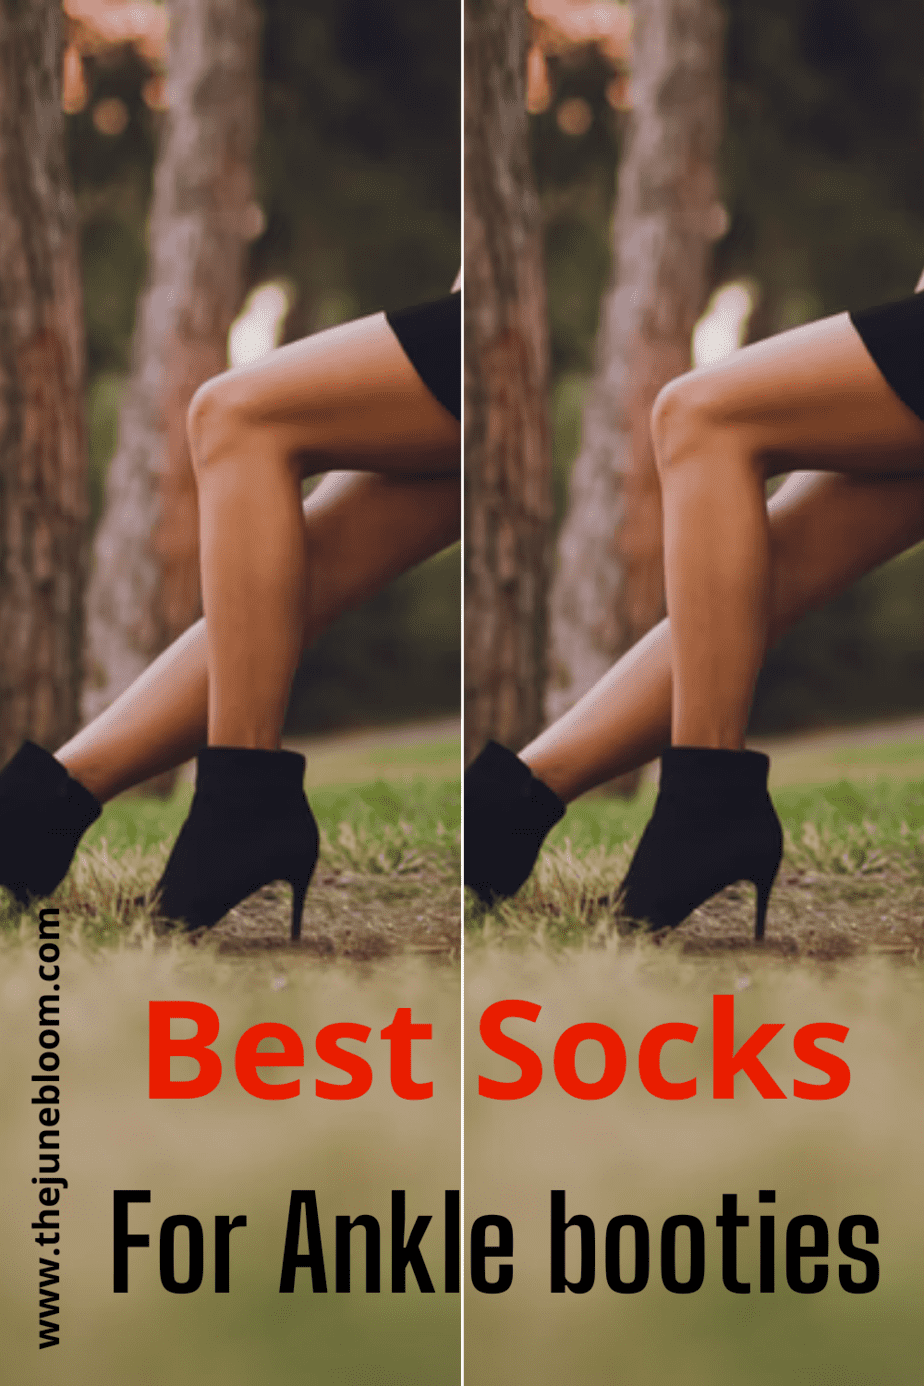 ankle boots with socks and dress